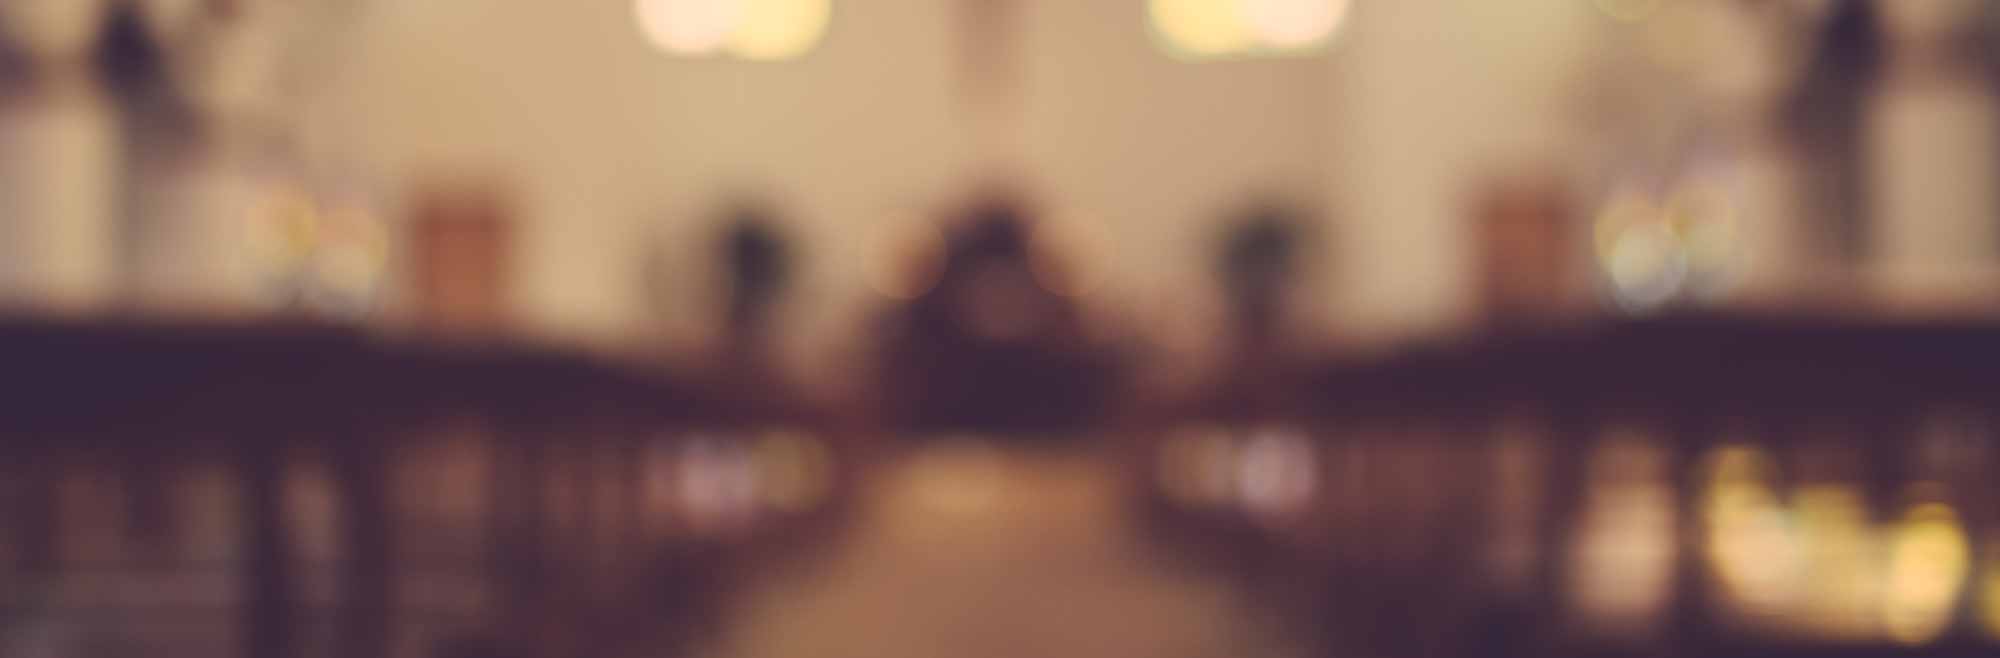 Blurred Church Benches